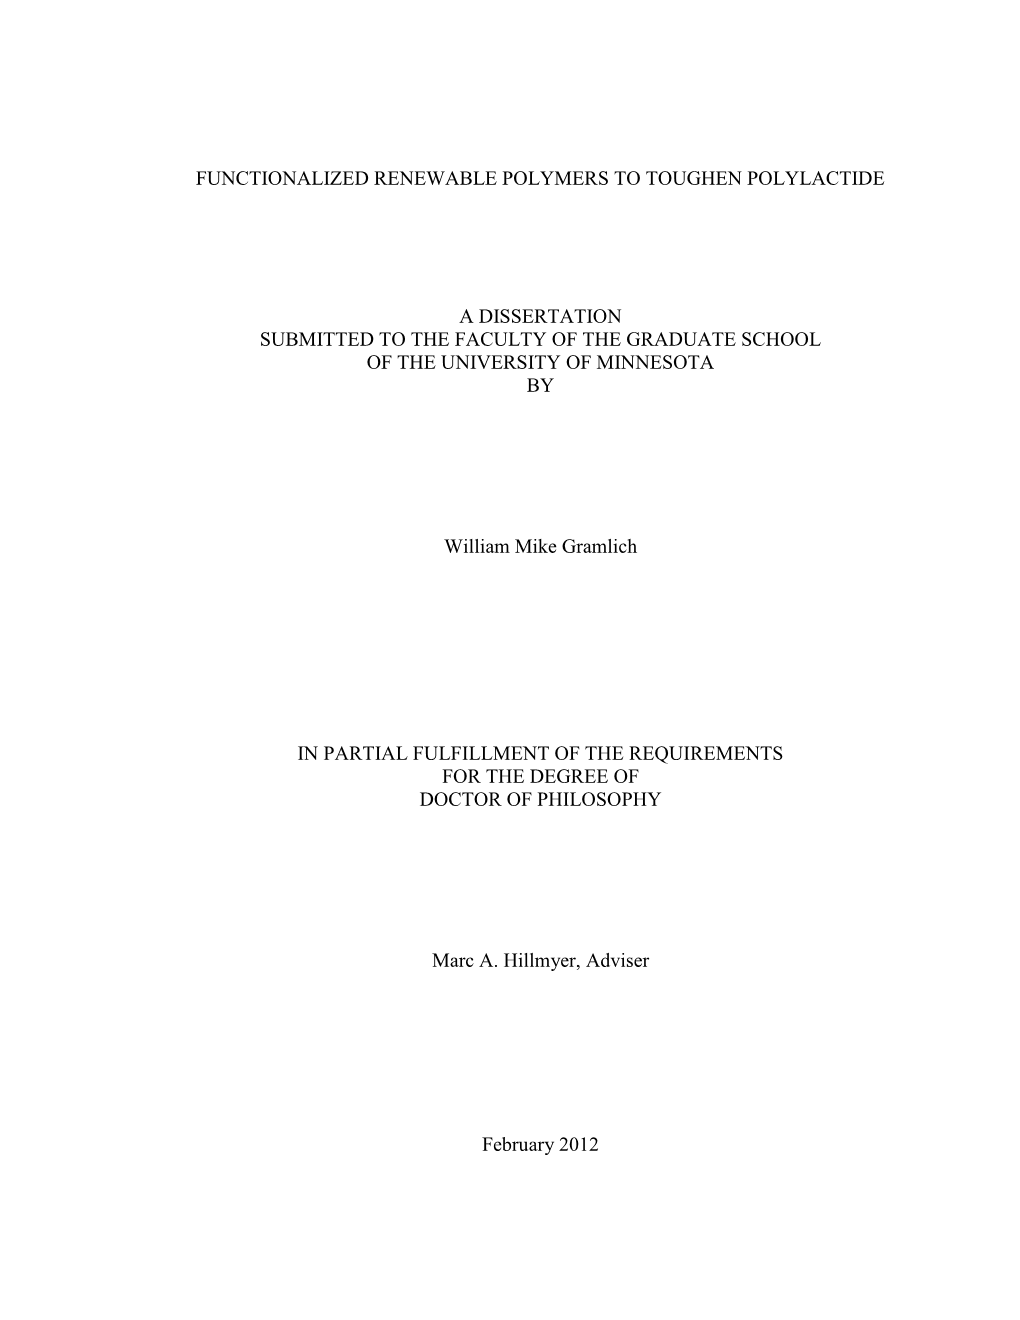 Functionalized Renewable Polymers to Toughen Polylactide a Dissertation Submitted to the Faculty of the Graduate School of the U